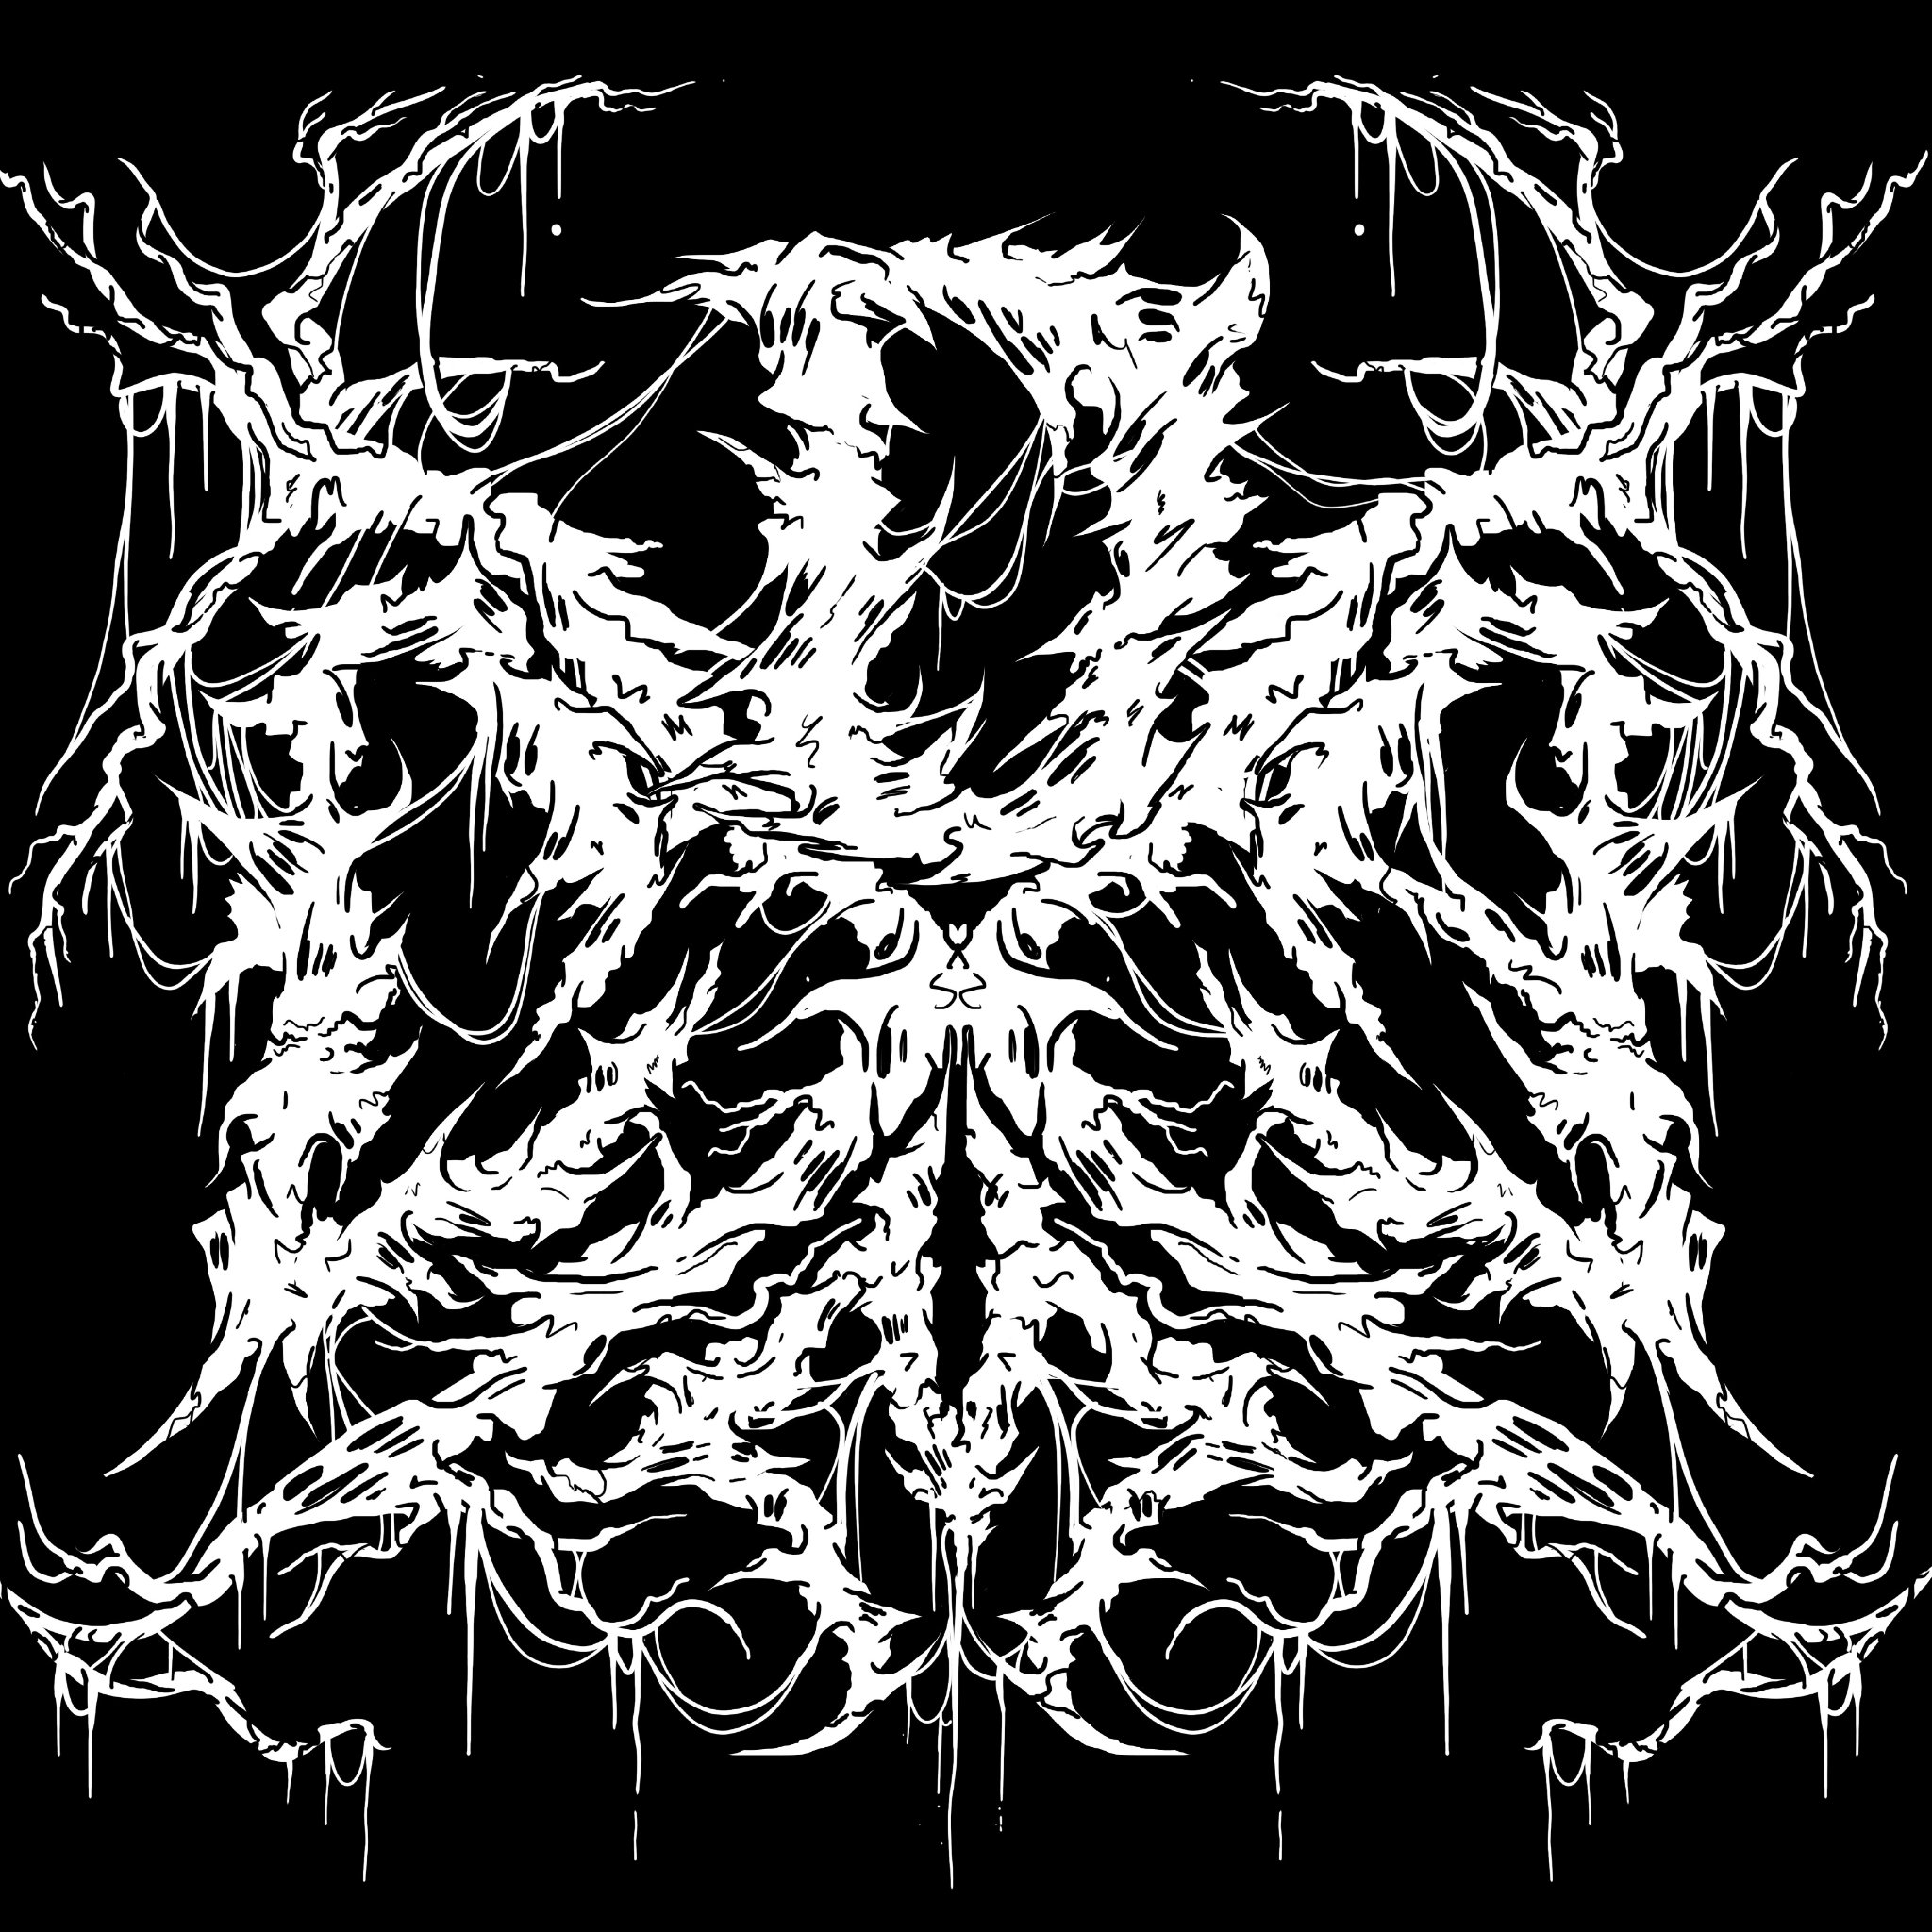 #CongenitalAbnormalities is a #DeathMetal band from Belfast, Northern Ireland.